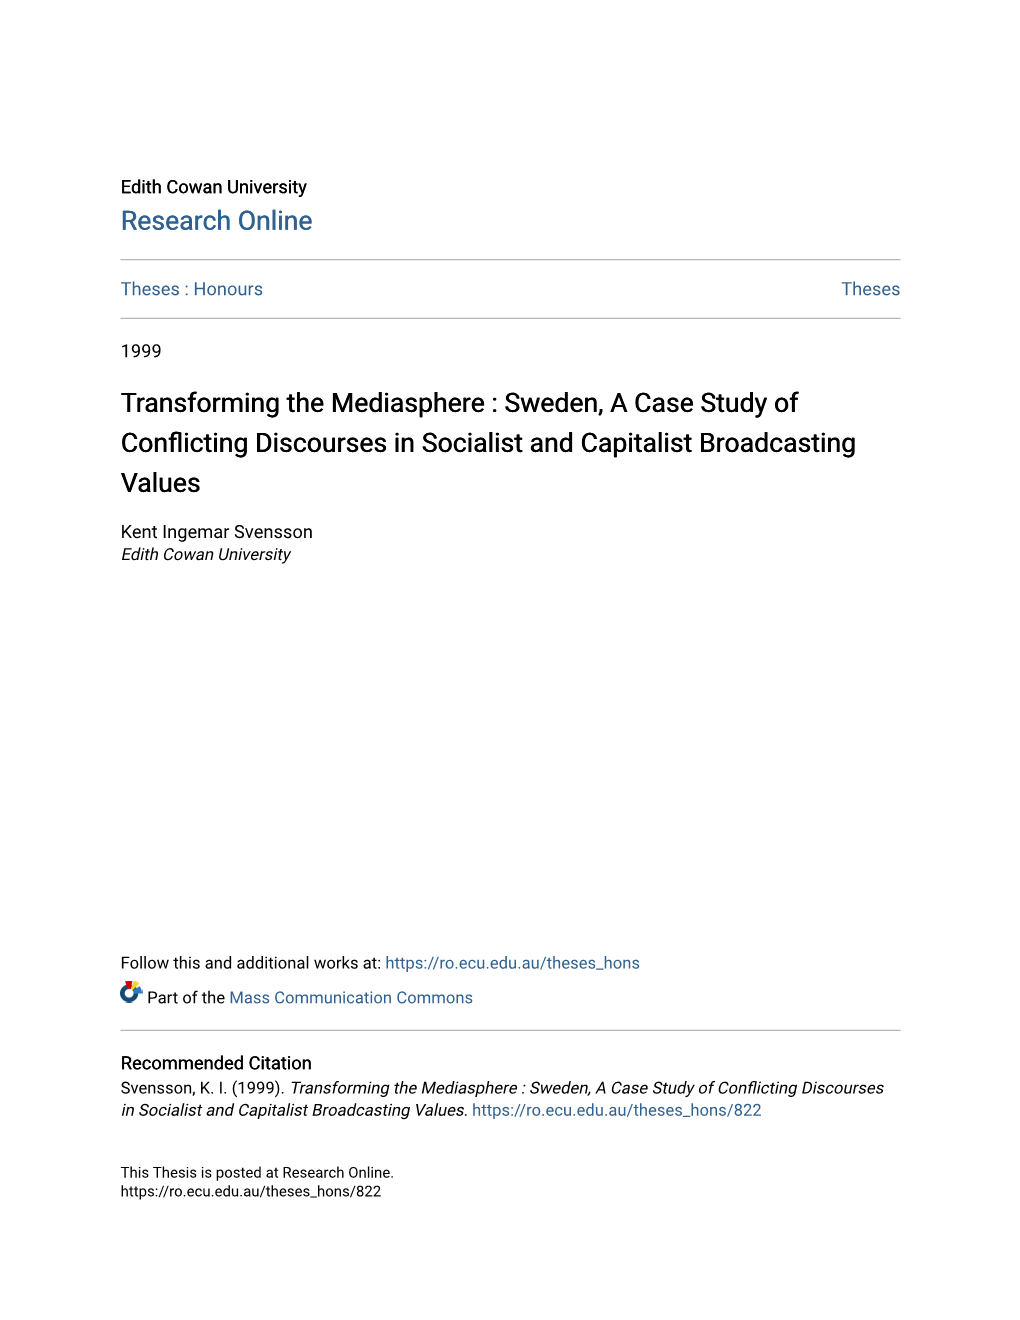 Sweden, a Case Study of Conflicting Discourses in Socialist and Capitalist Broadcasting Values